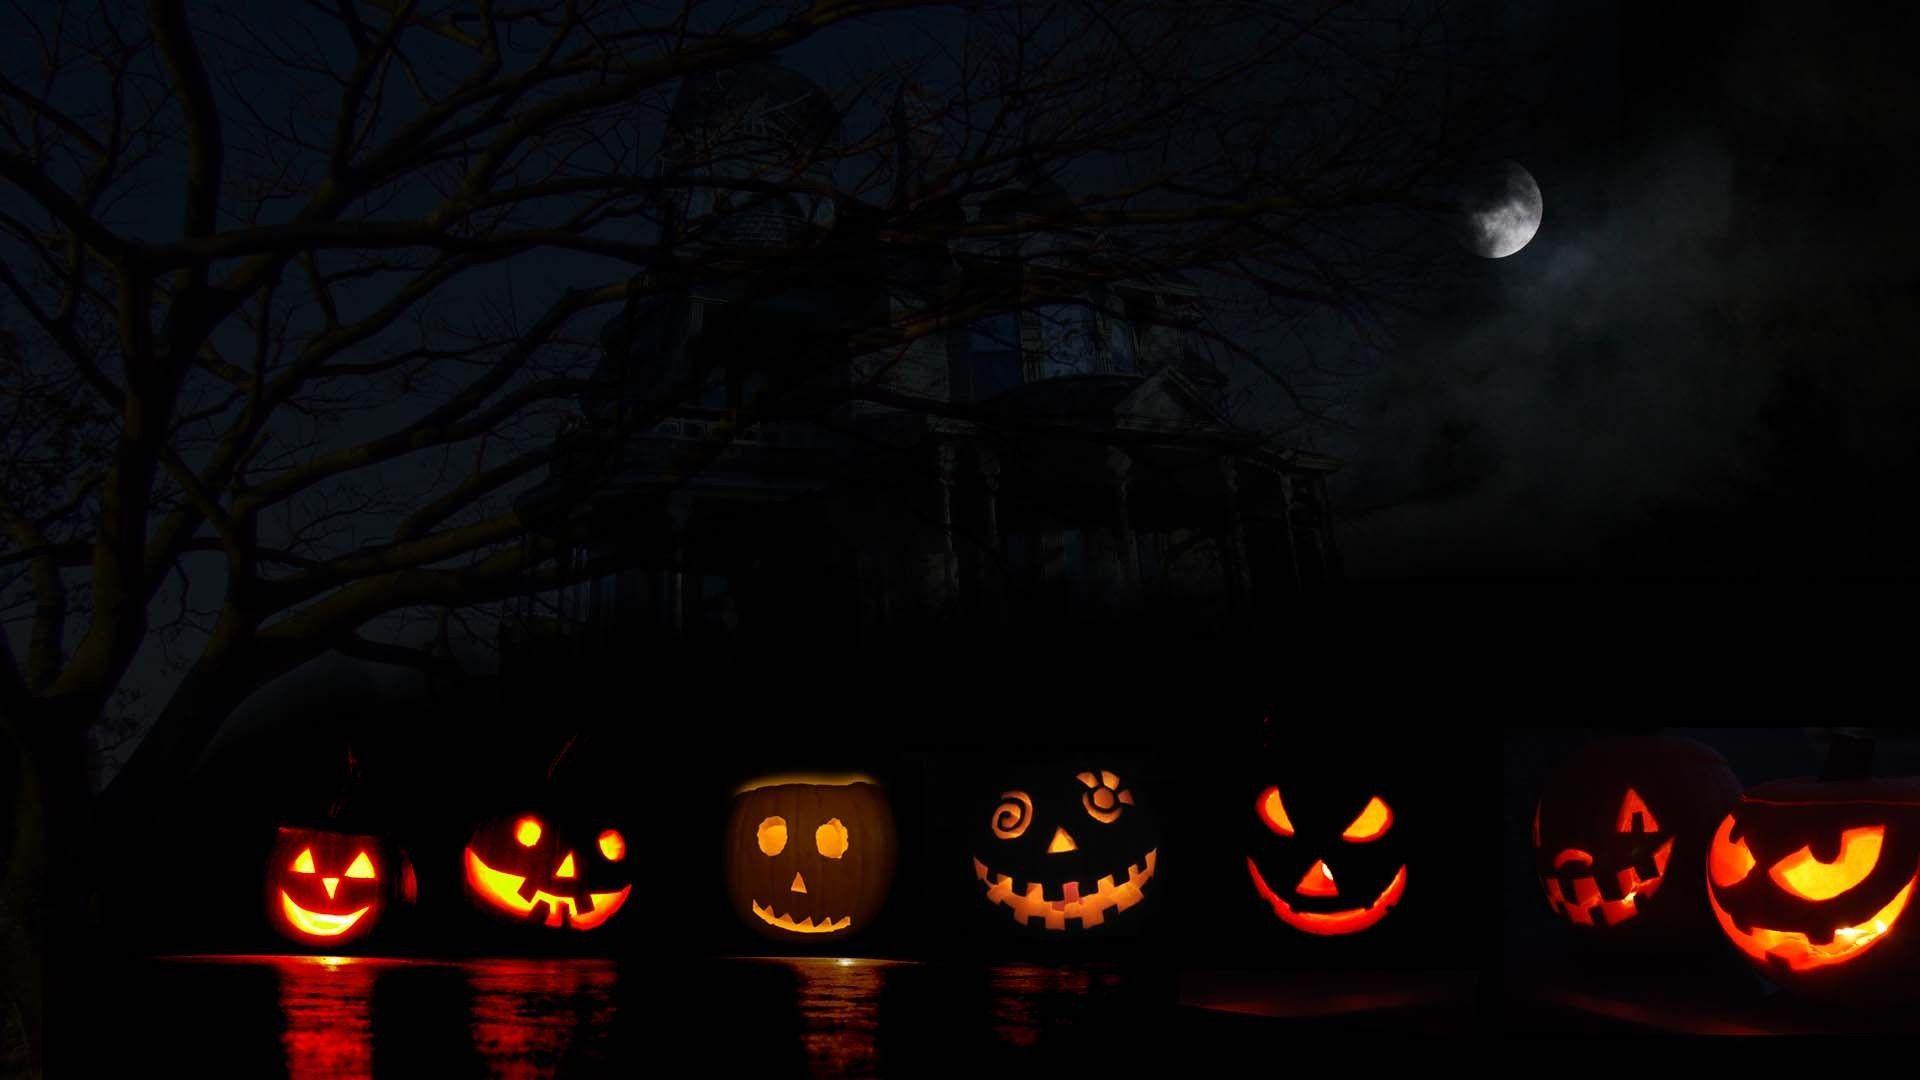 Scary Halloween Pumpkin Image, Picture, Wallpaper to